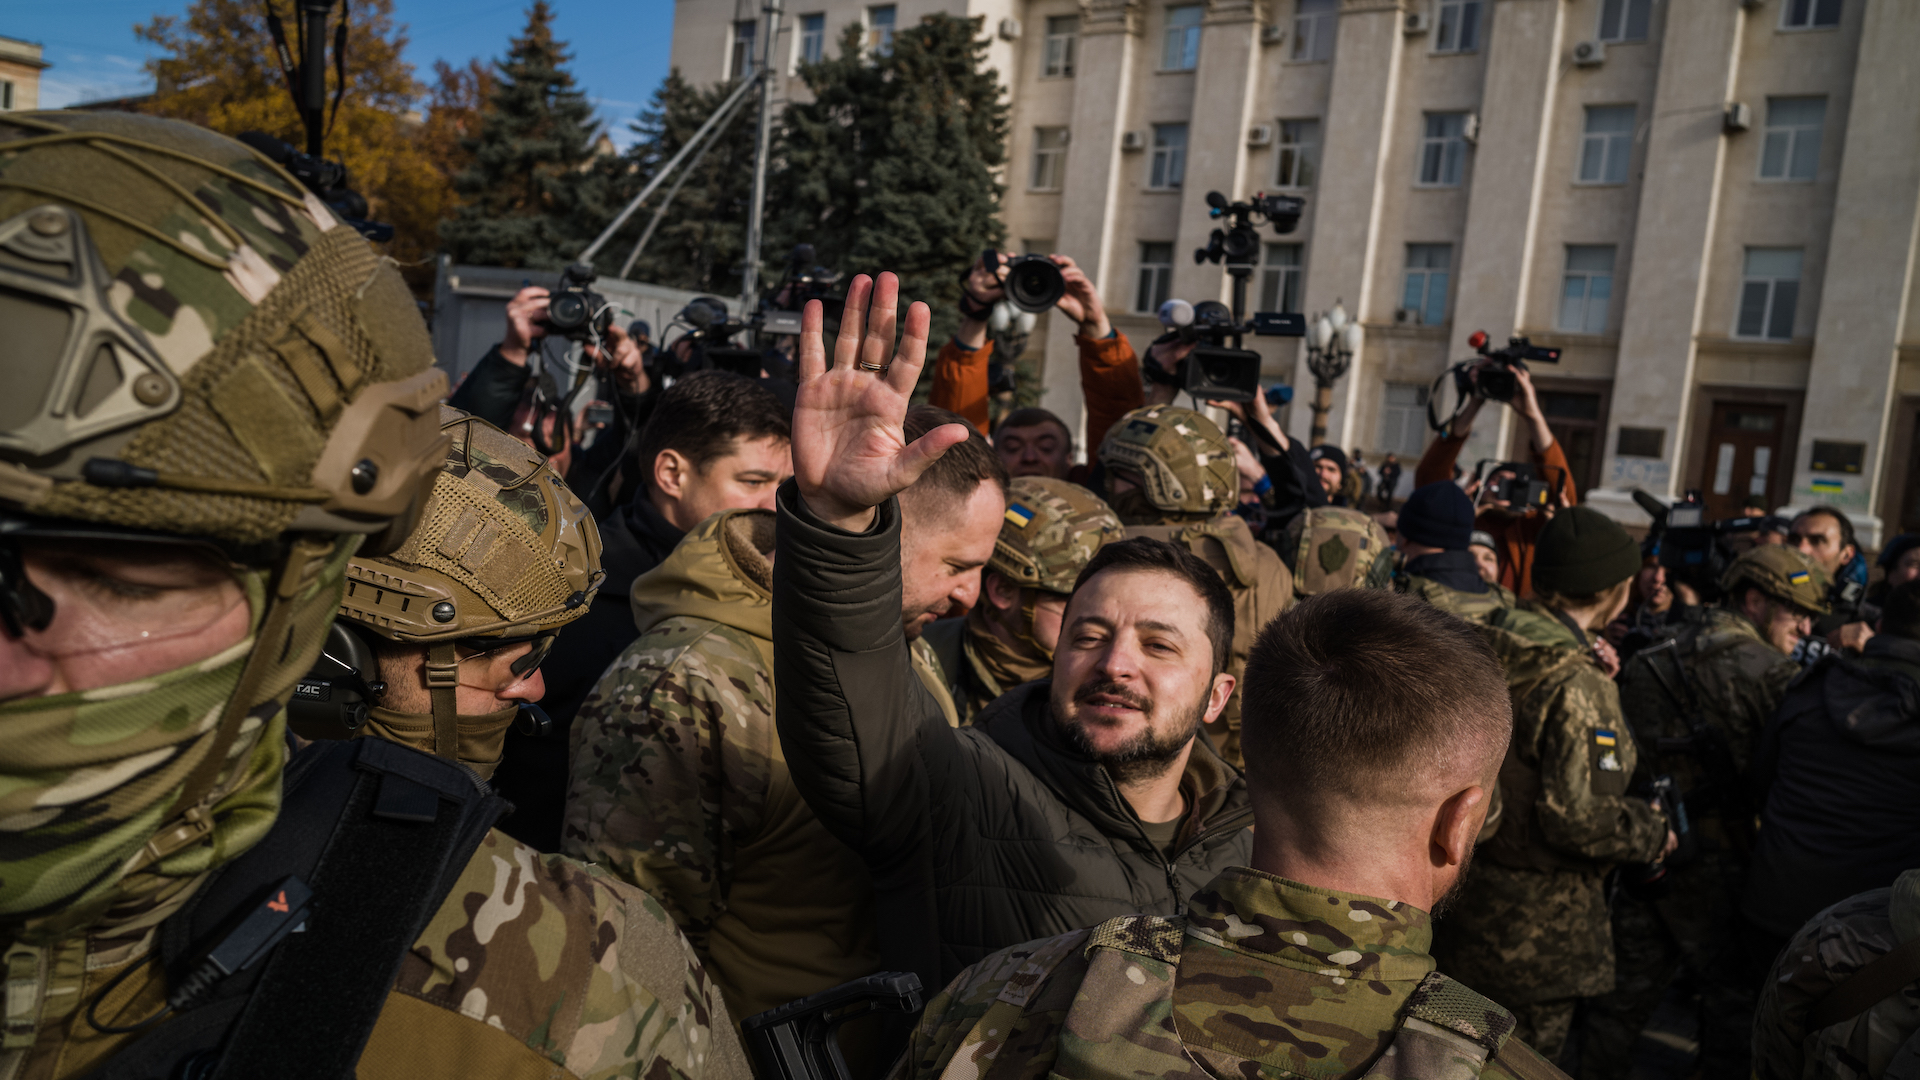 Army Xxx Gang Ref - In visit to Kherson city, Zelensky sees 'beginning of the end of the war' -  The Washington Post